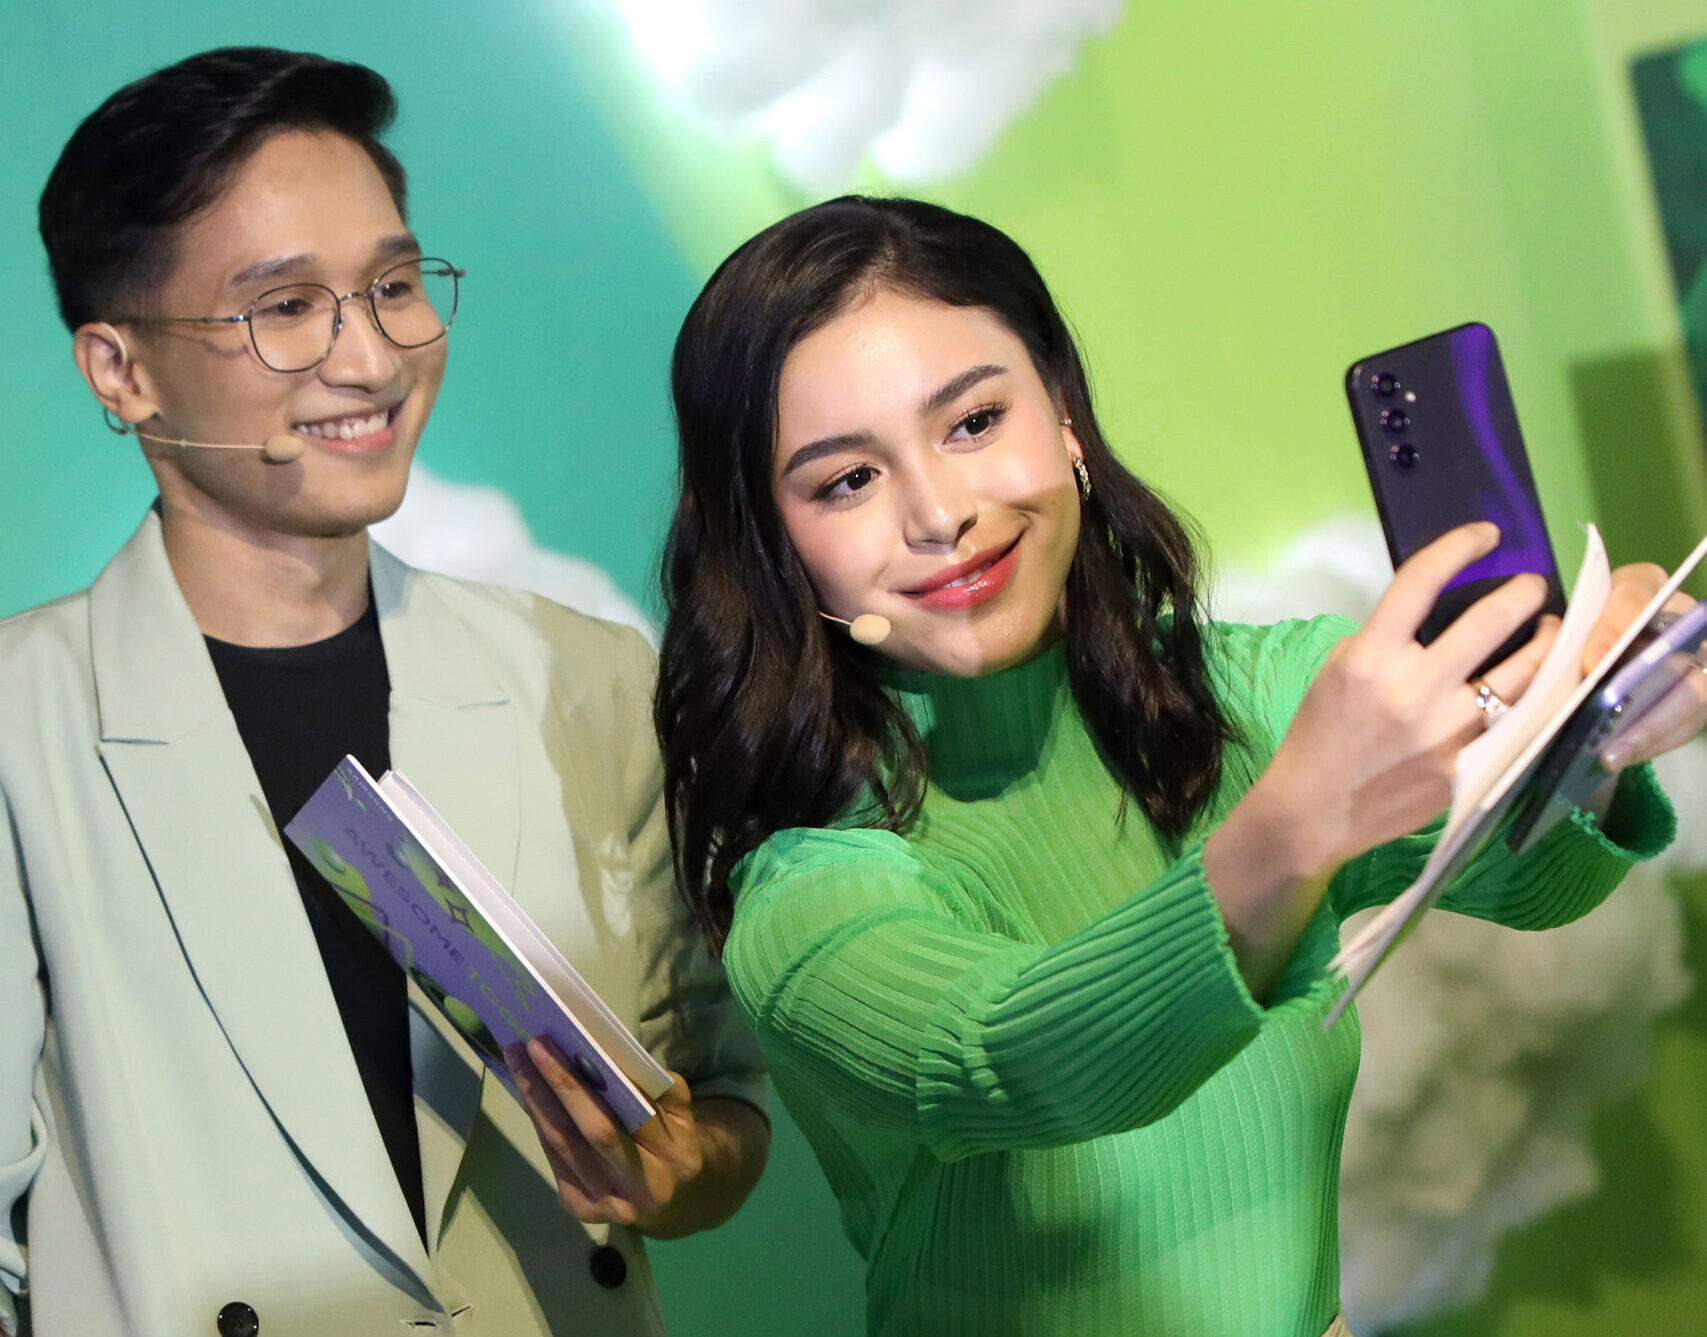 Samsung Philippines Product Marketing Manager Mark Que and celebrity style icon Claudia Barretto scaled e1680270016641